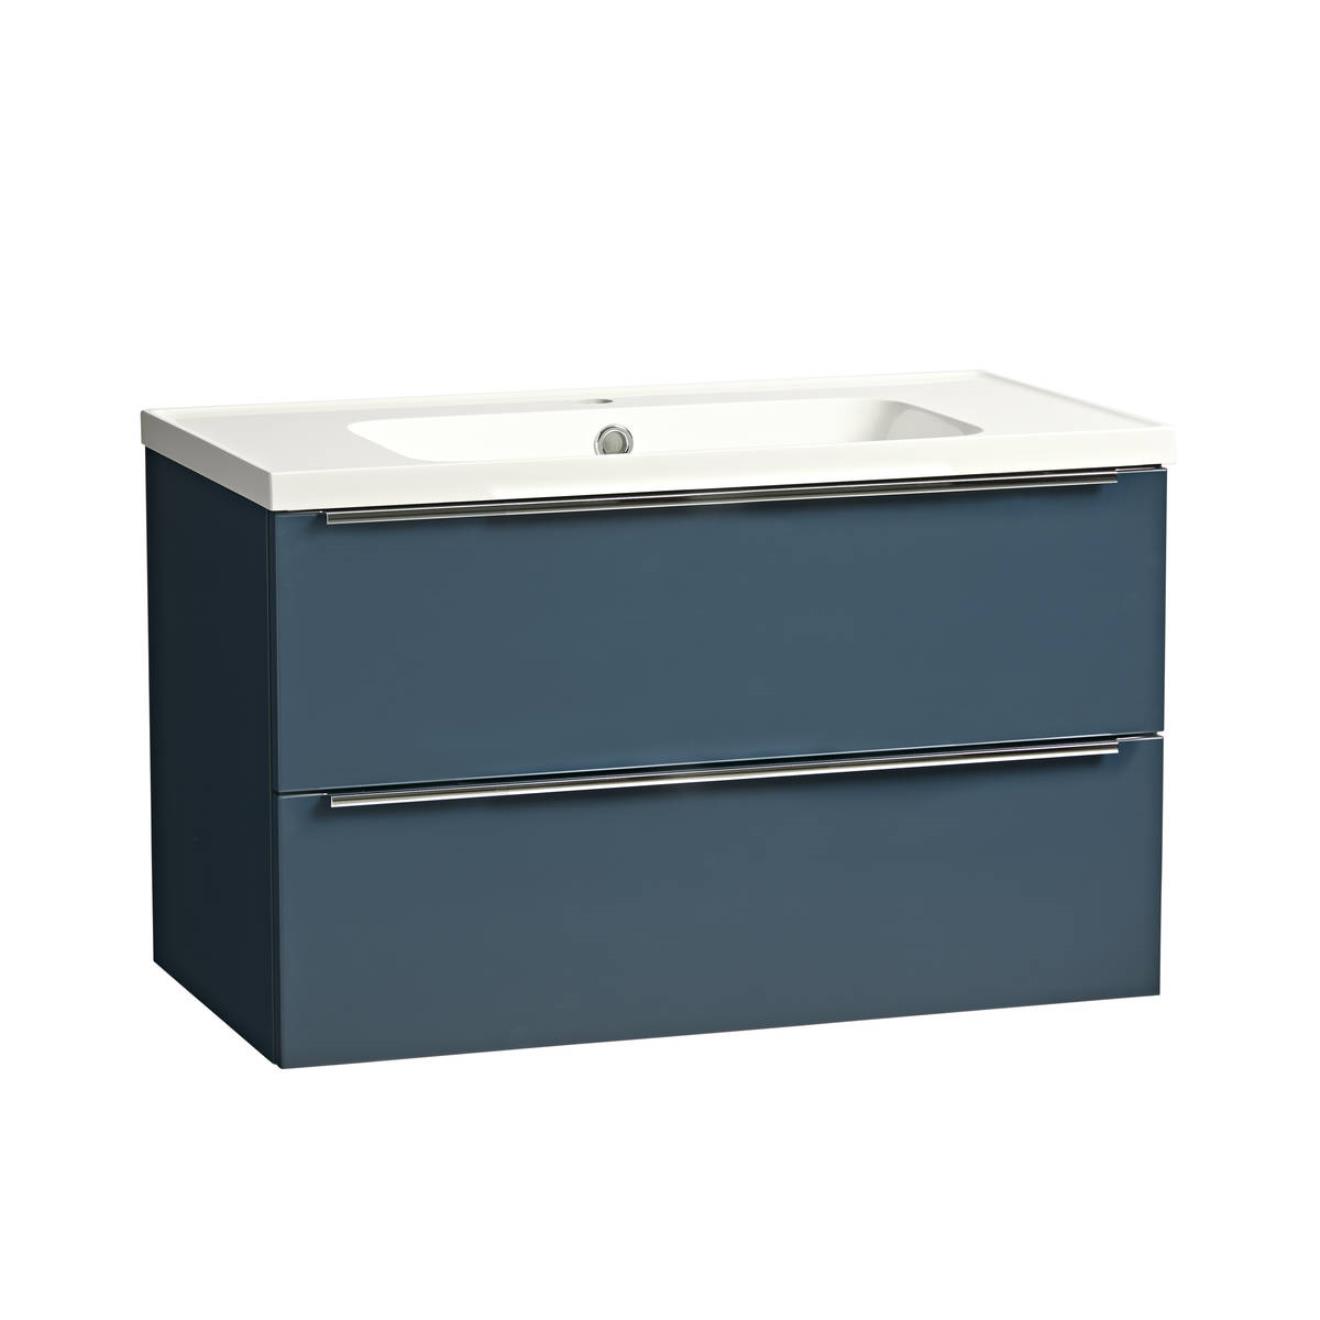 Cadence Wall Hung Vanity Unit & Isocast Basin Oxford Blue 800mm